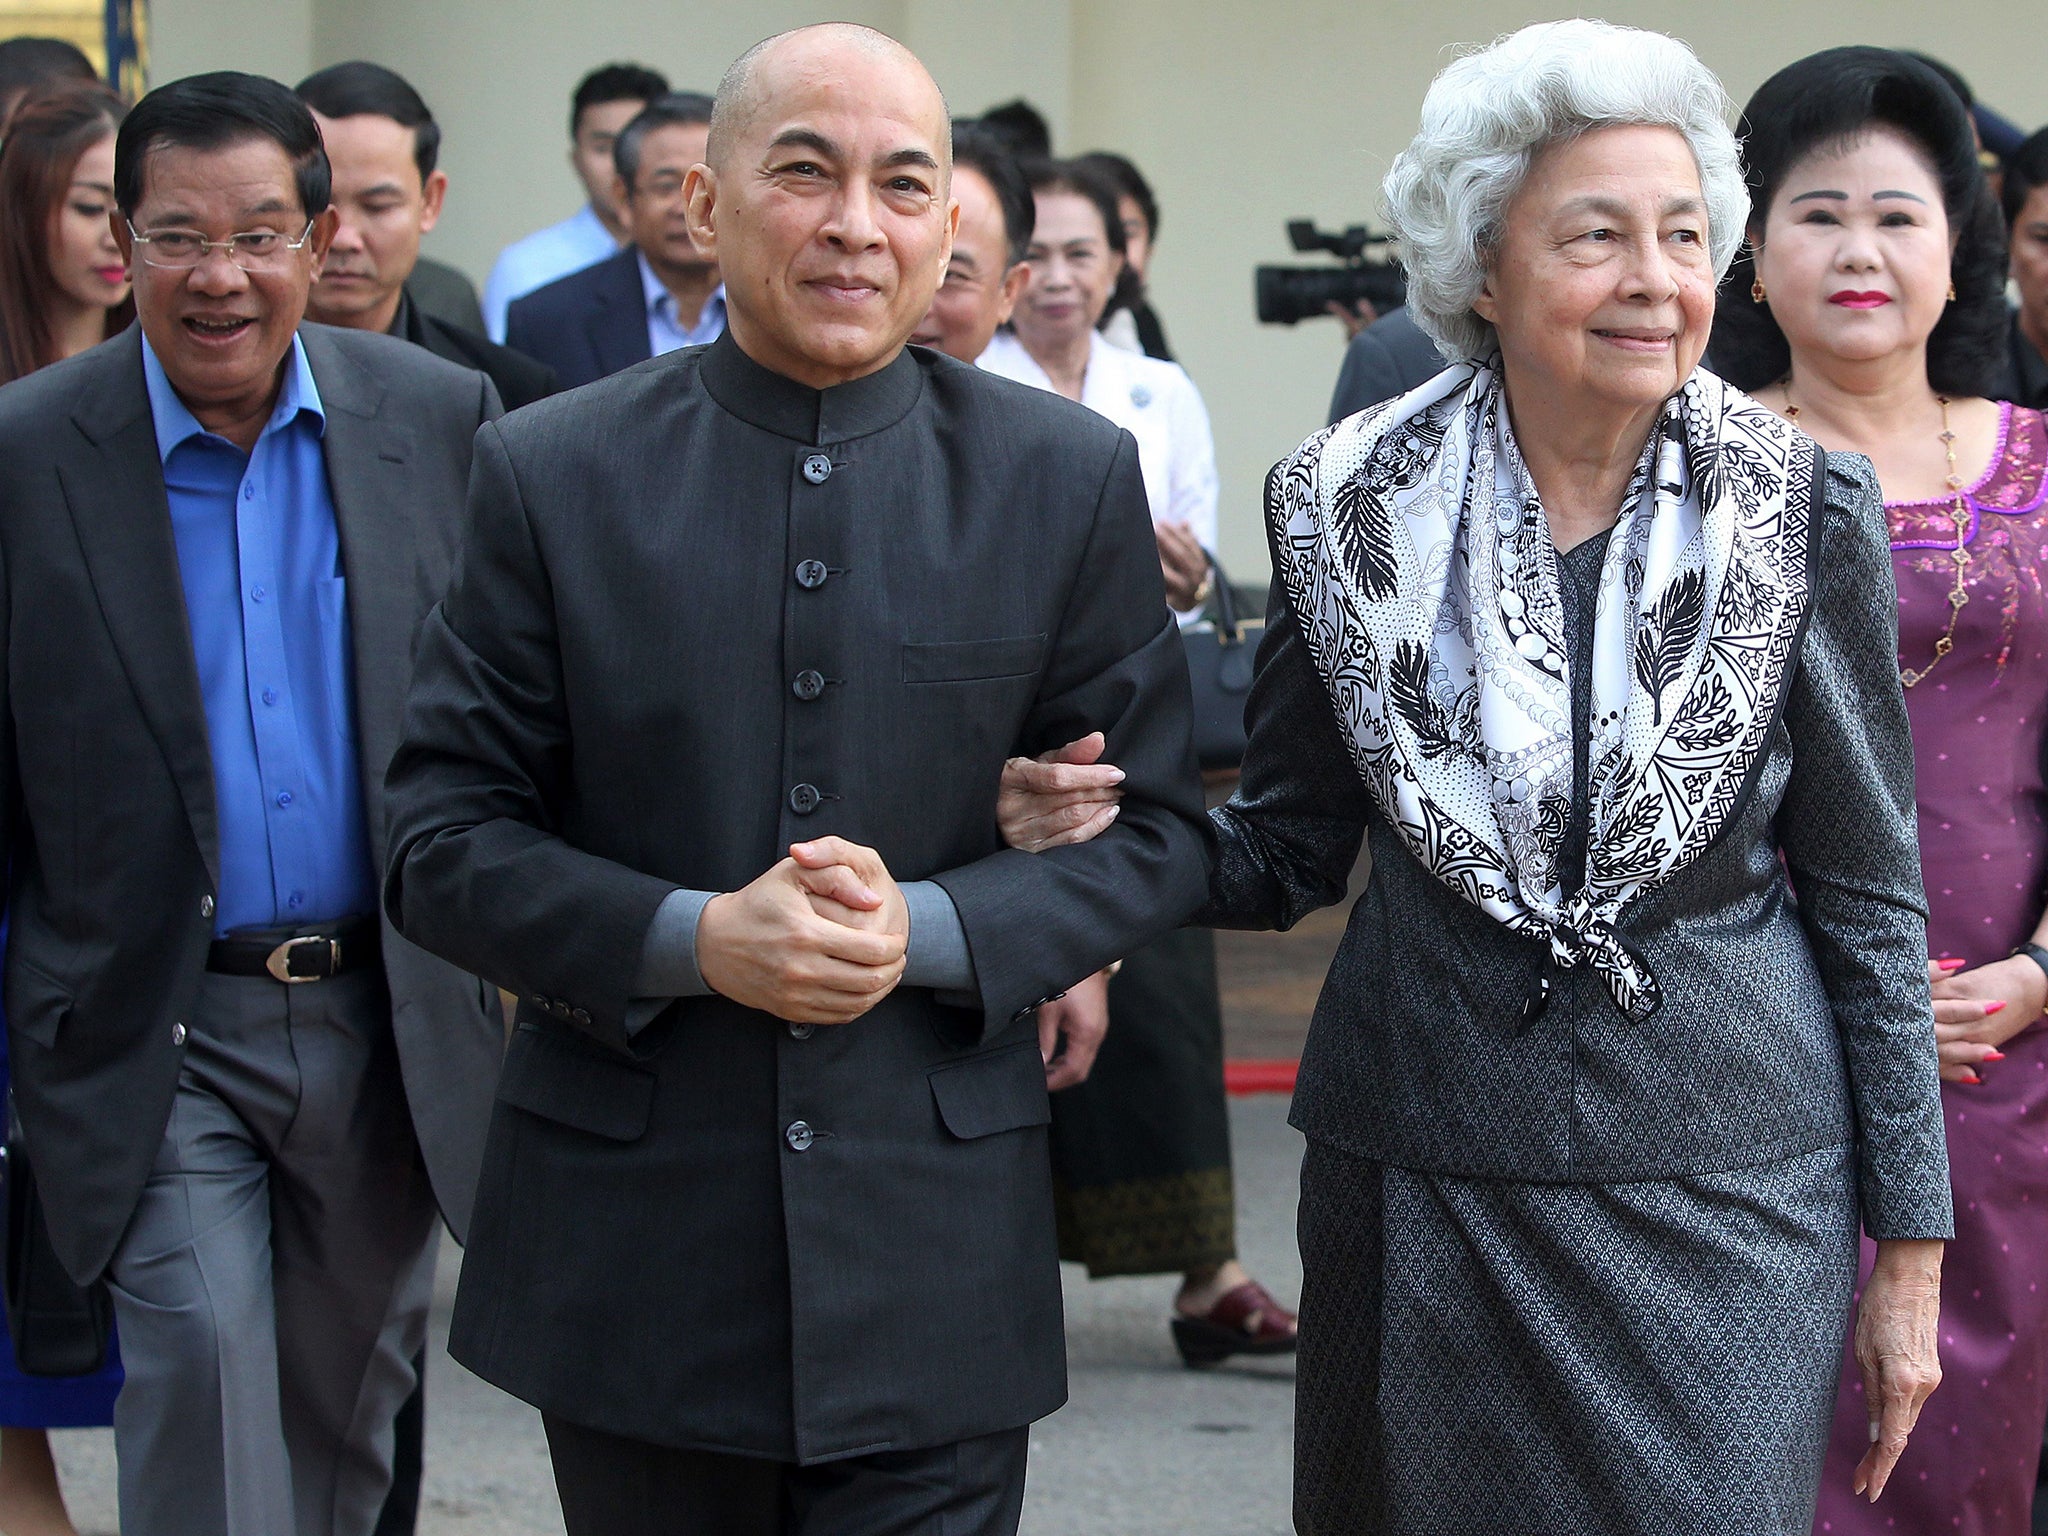 Cambodia's King Norodom Sihamoni and his mother former queen Monique